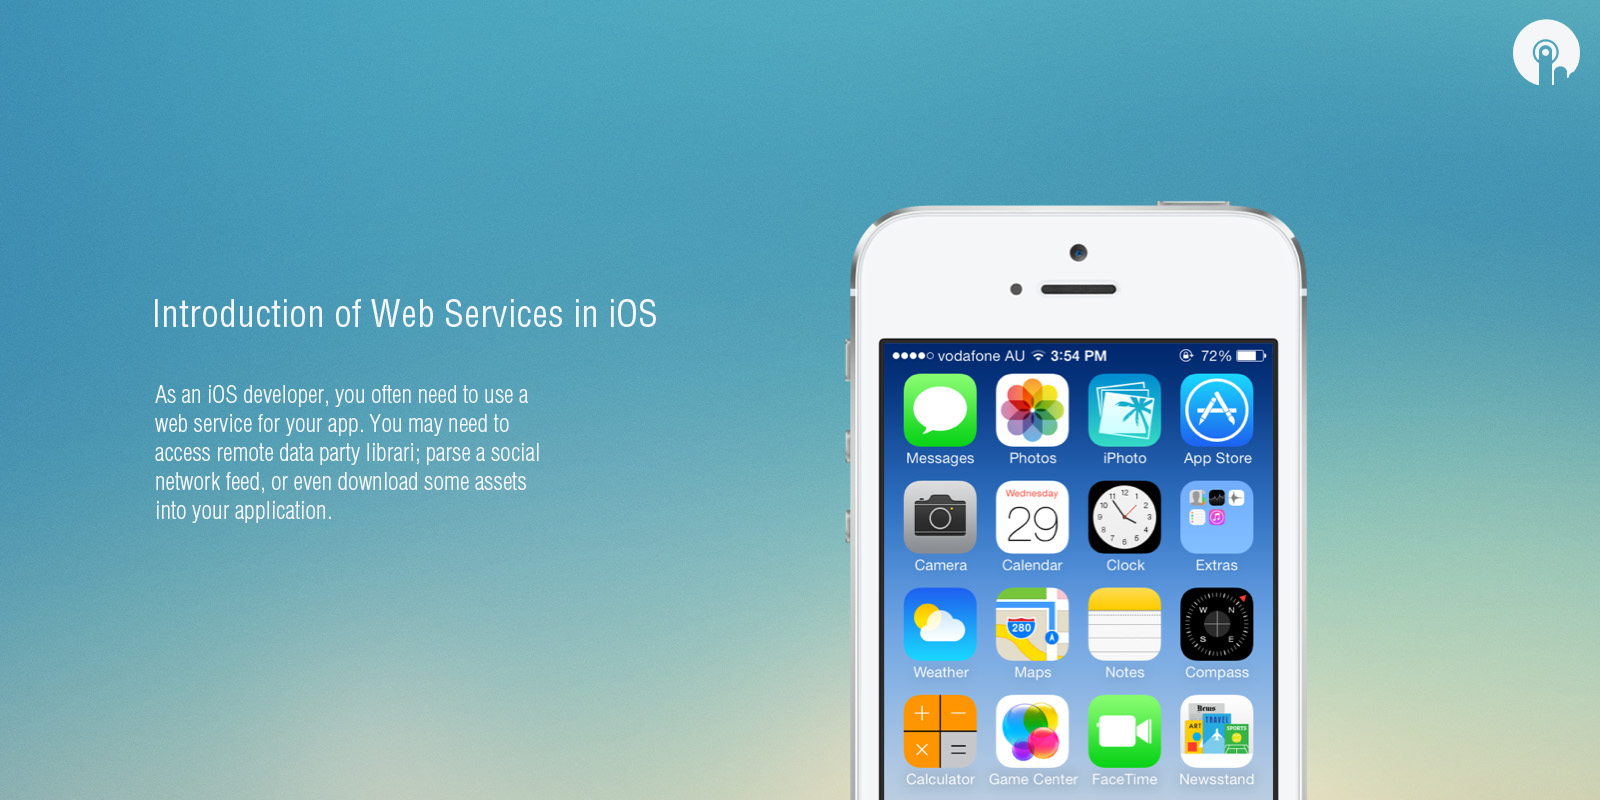 web services in iOS image